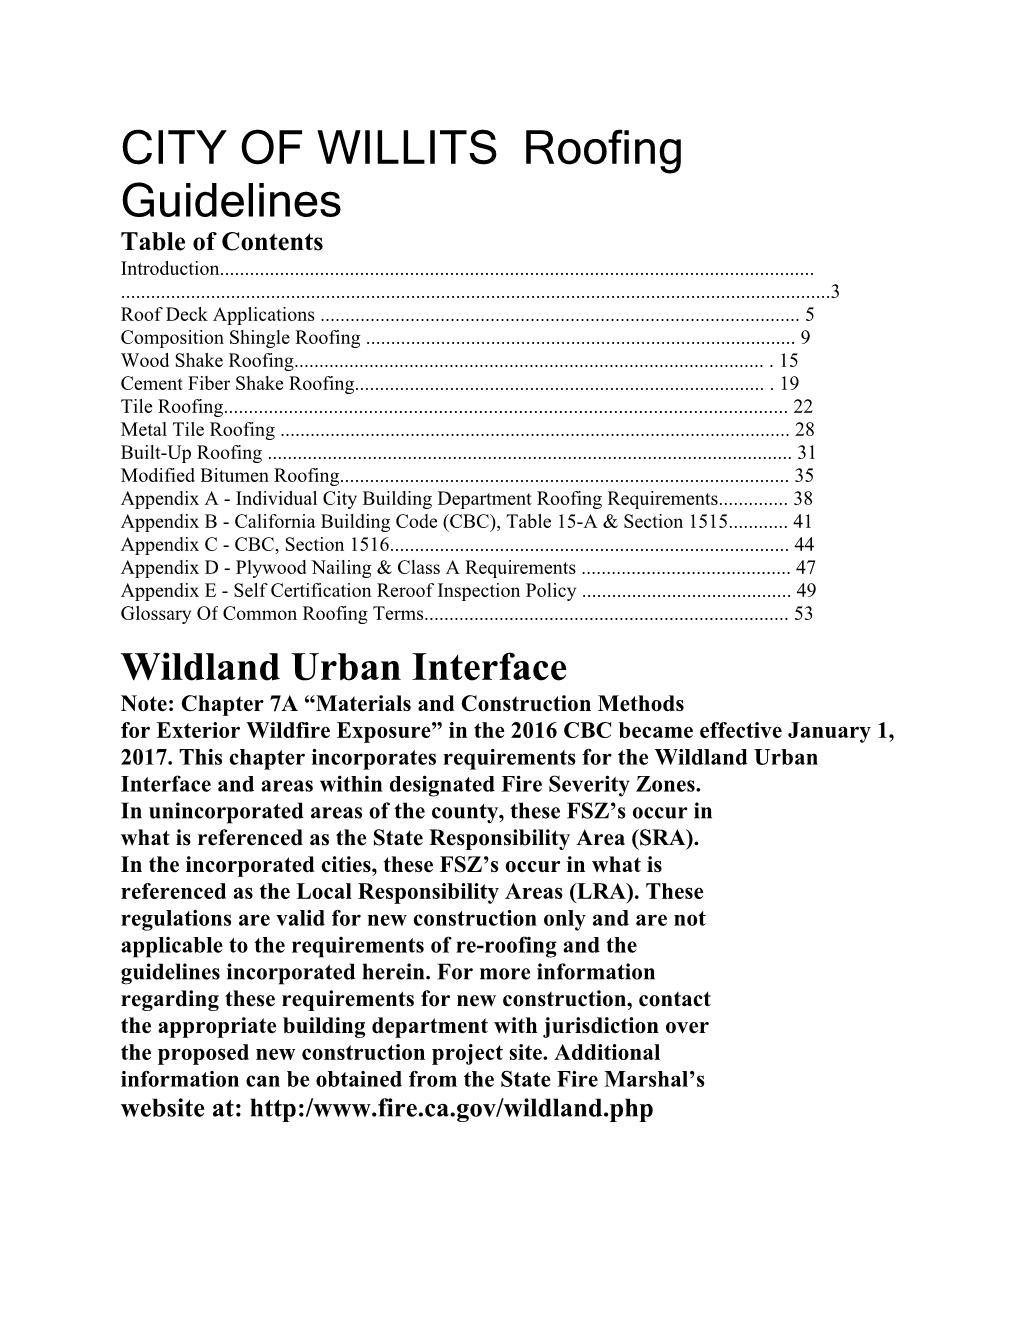 CITY of WILLITS Roofing Guidelines Table of Contents Introduction